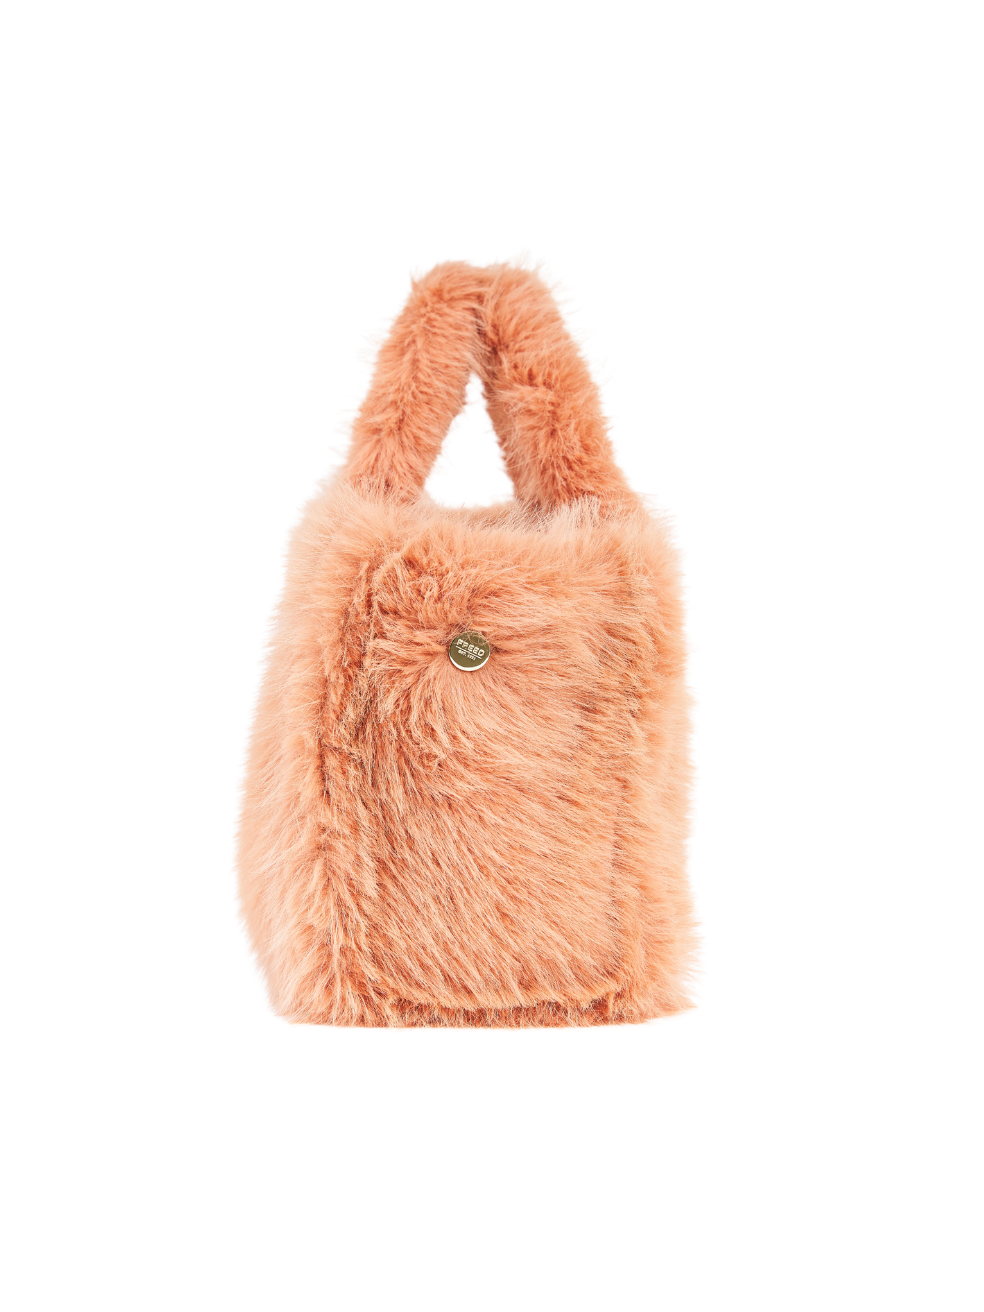 XL Tote Bag Large Apricot Animal Free Shaggy Fur Canadian Made Sustainable Accessories